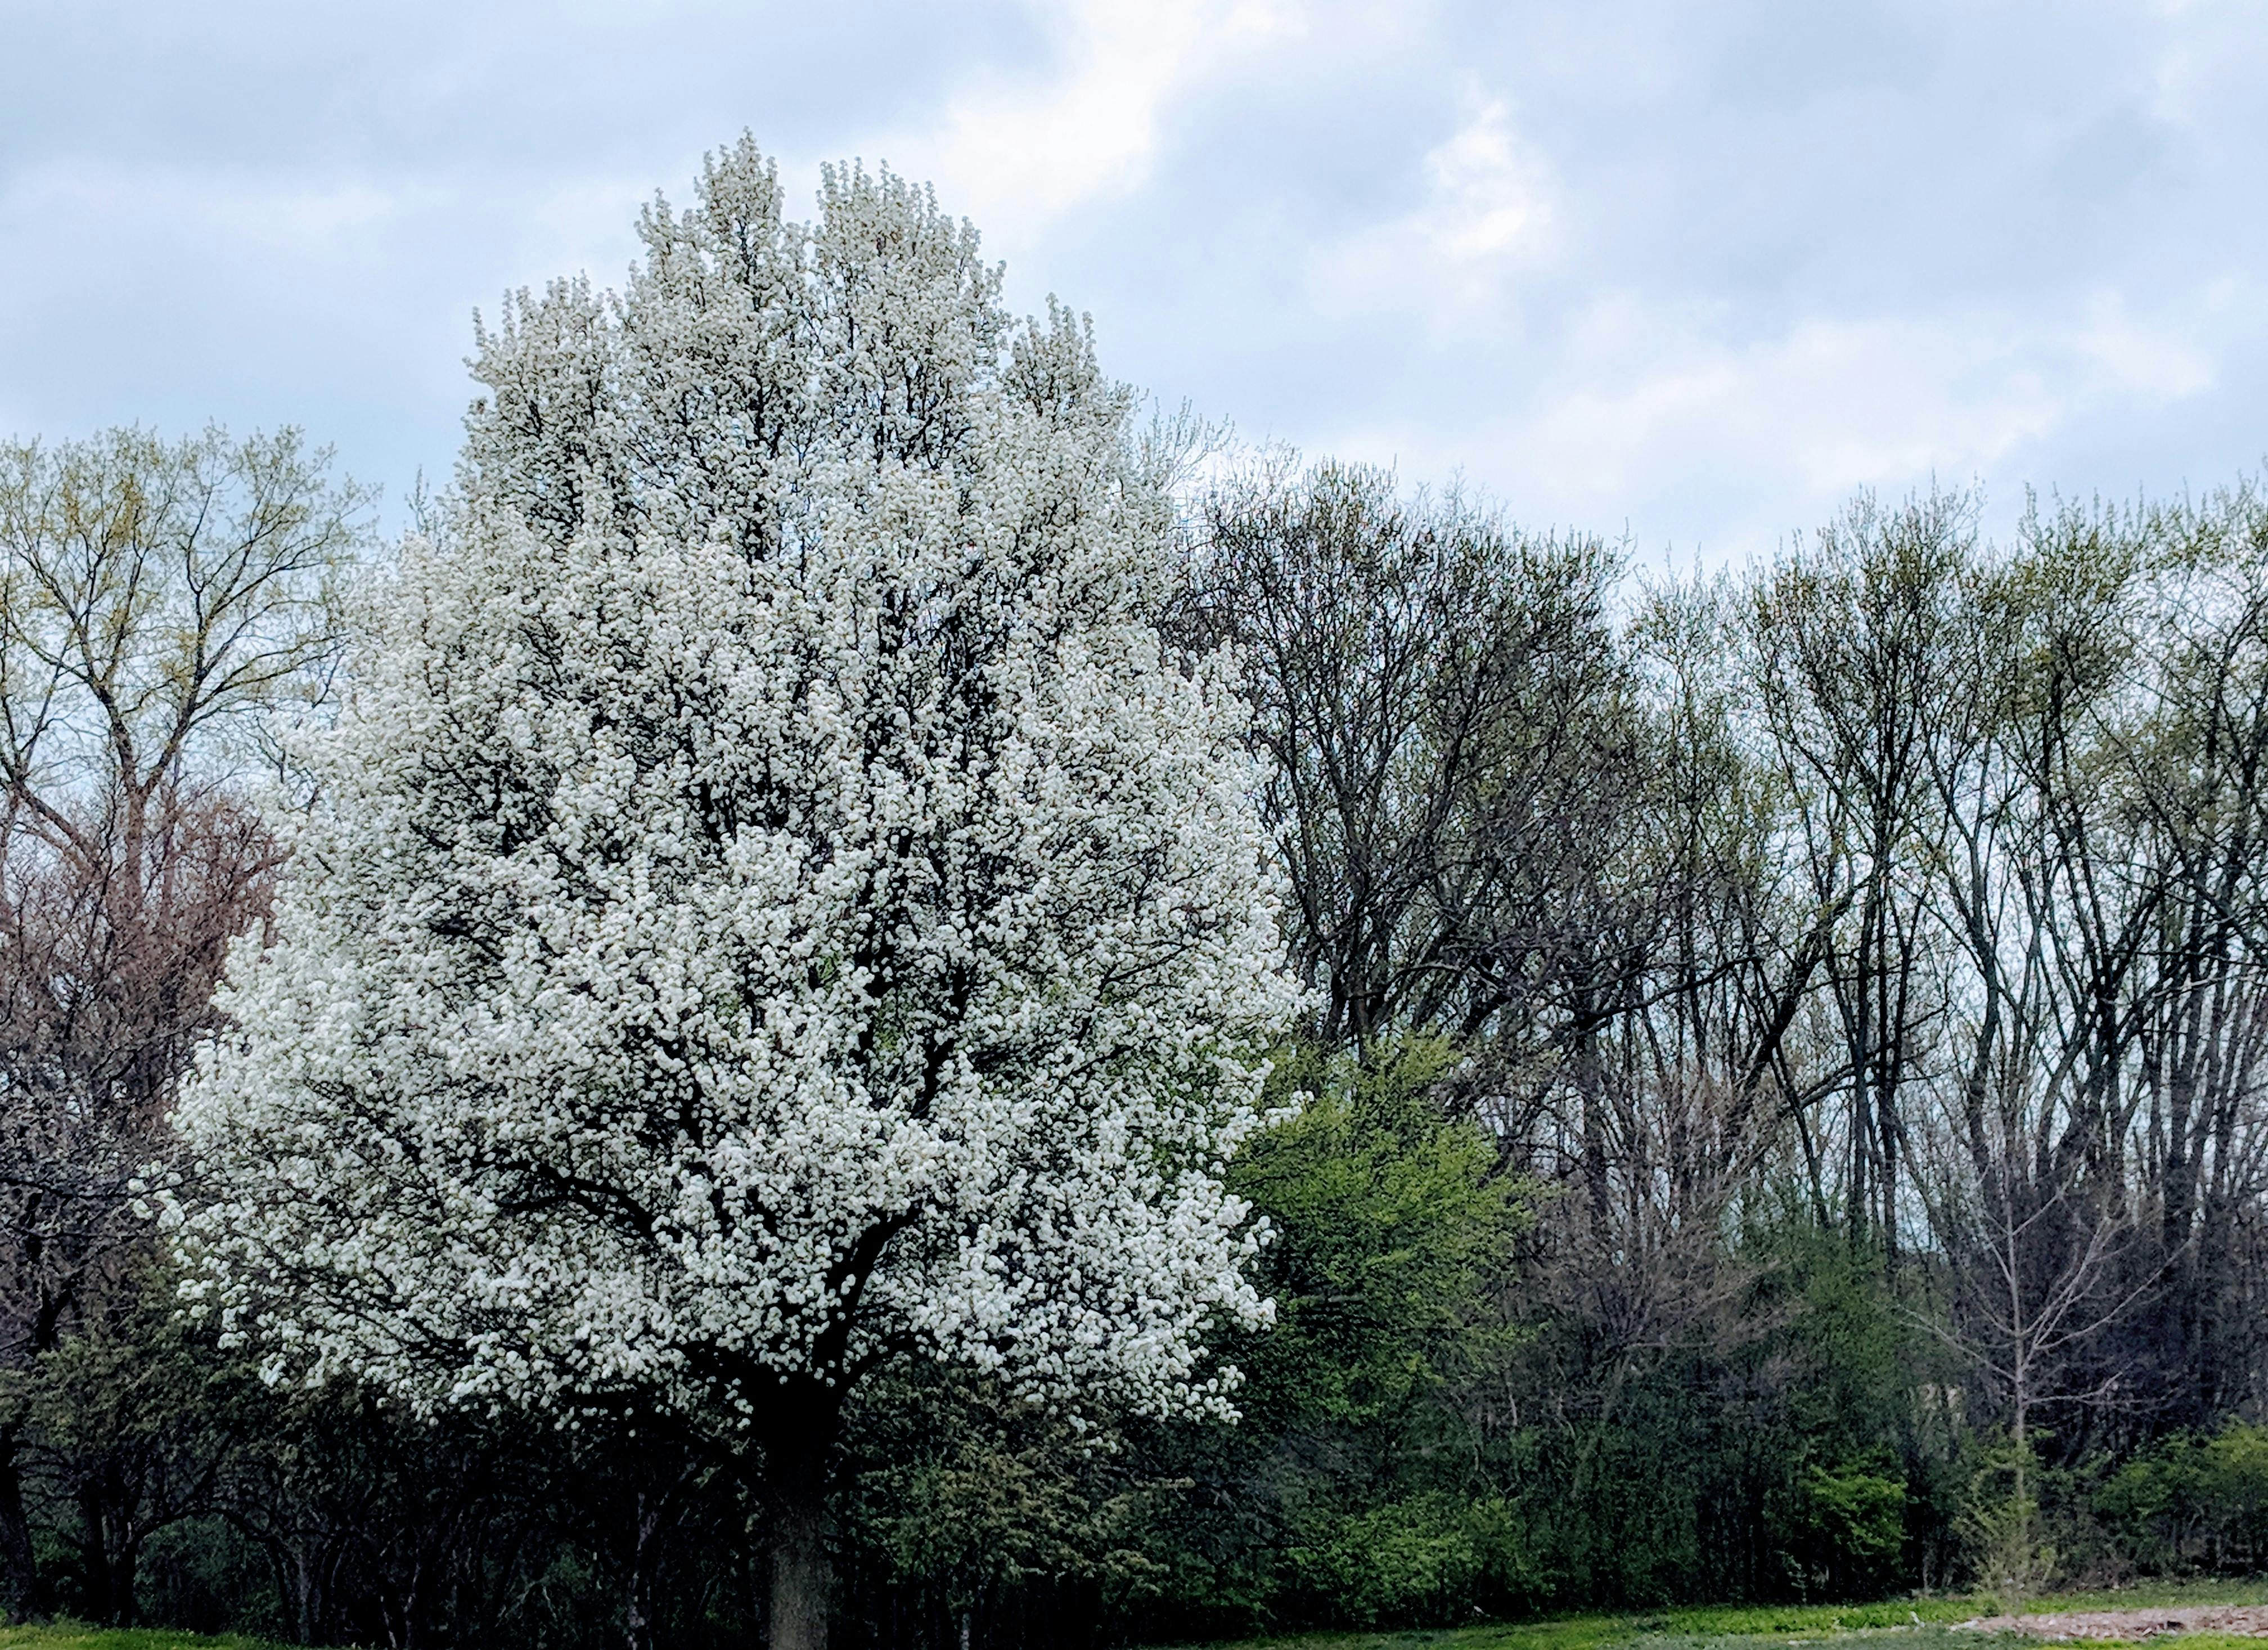 Free stock photo of pear blossom tree, pear blossoms, white flowering tree